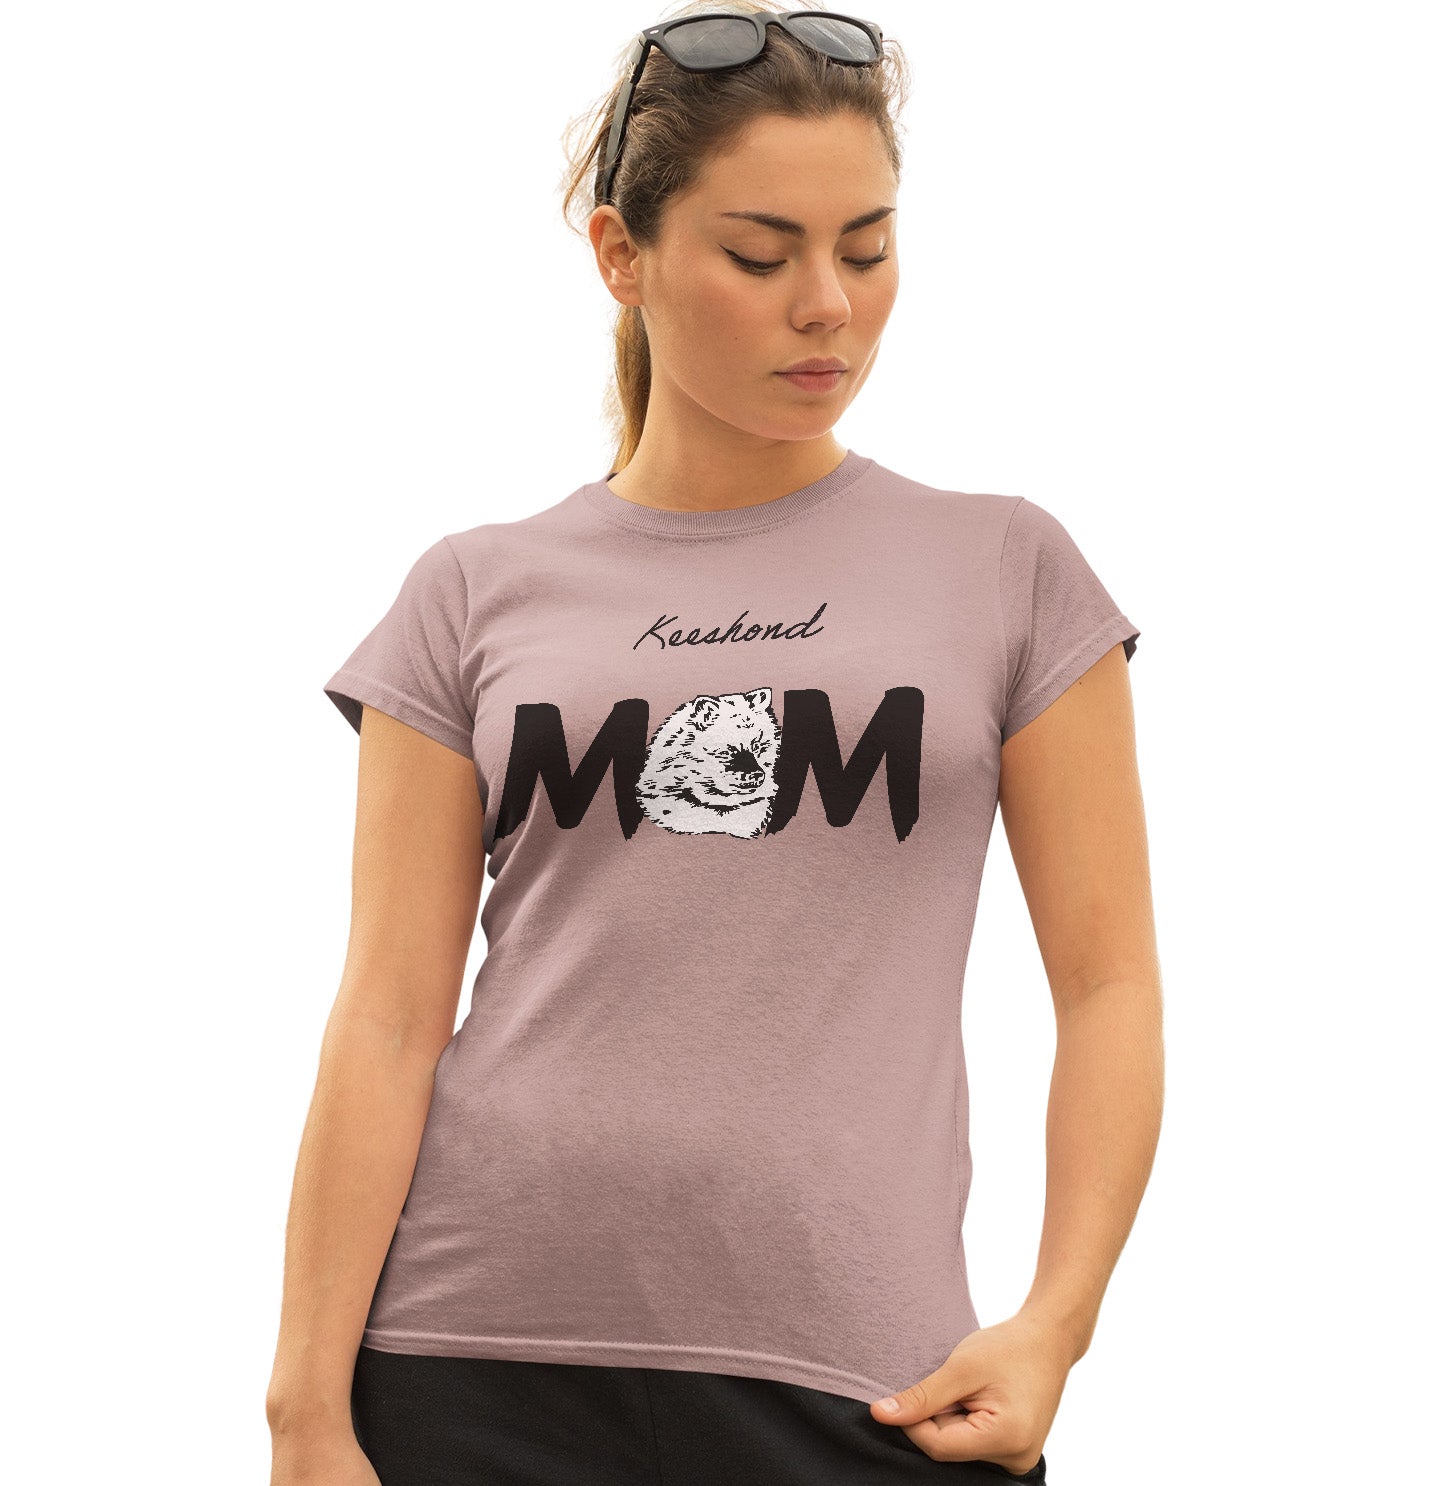 Keeshond Breed Mom - Women's Fitted T-Shirt